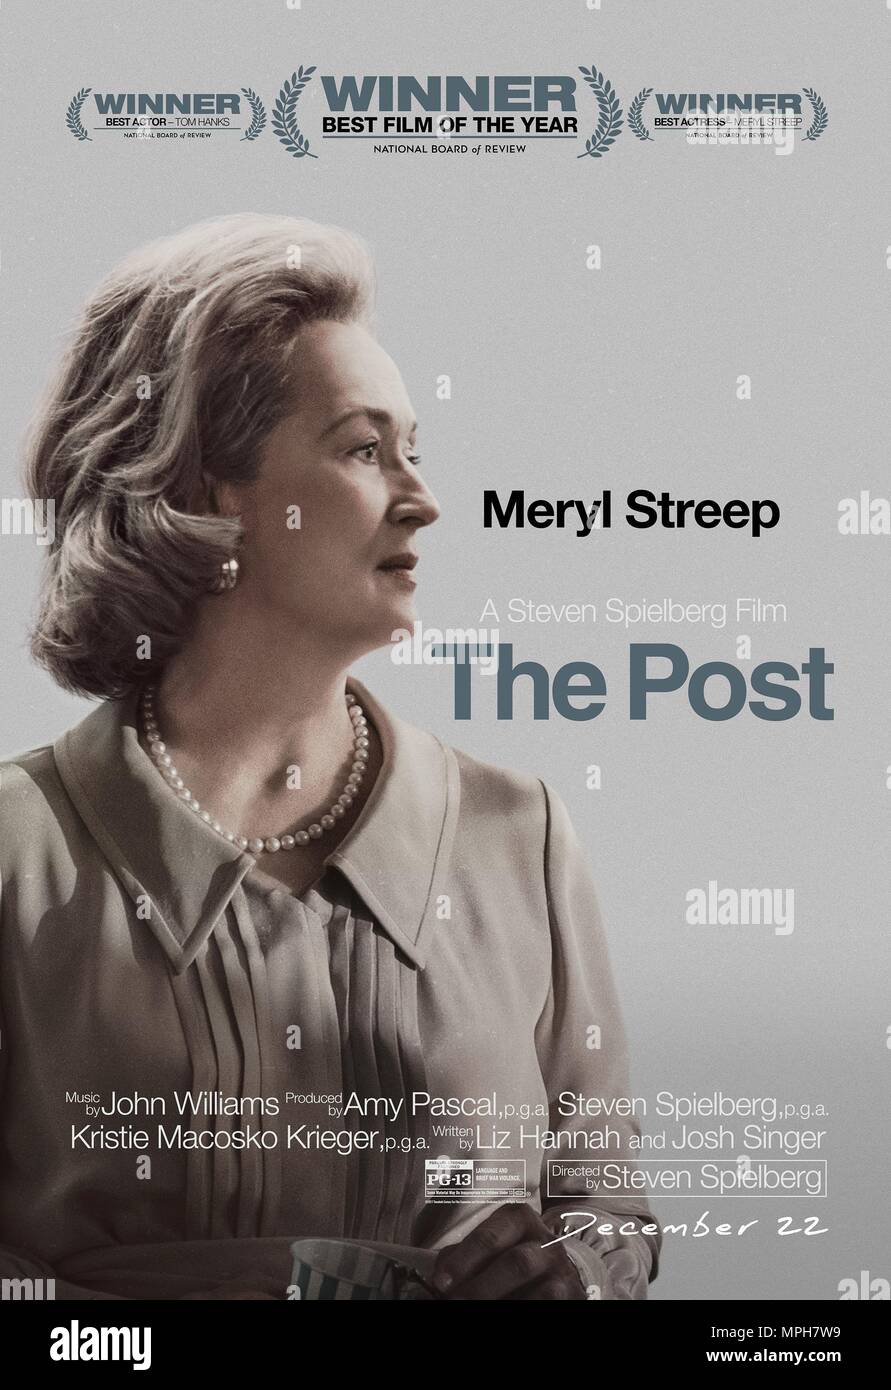 RELEASE DATE: January 12, 2018 TITLE: The Post STUDIO: Twentieth Century Fox DIRECTOR: Steven Spielberg PLOT: A cover-up that spanned four U.S. Presidents pushed the country's first female newspaper publisher and a hard-driving editor to join an unprecedented battle between journalist and government. STARRING: MERYL STREEP as Kay Graham. (Credit Image: © Twentieth Century Fox/Entertainment Pictures) Stock Photo